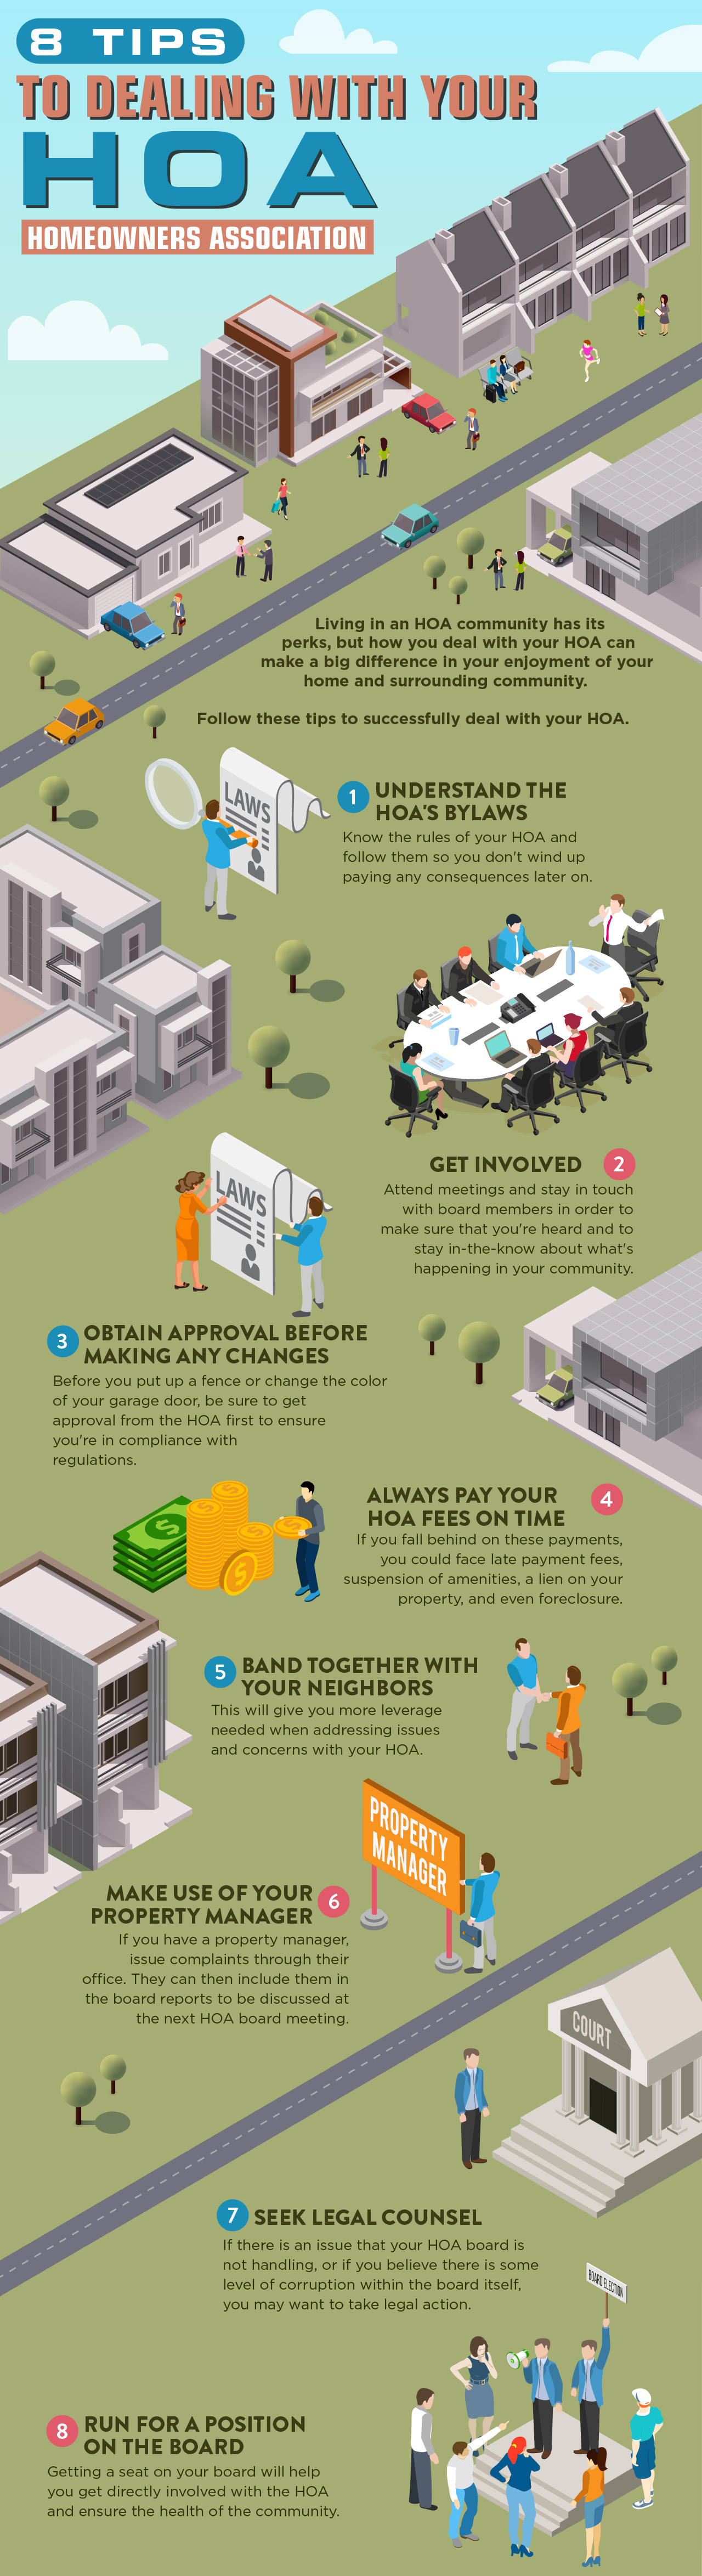 8-tips-to-dealing-with-your-hoa-graphic